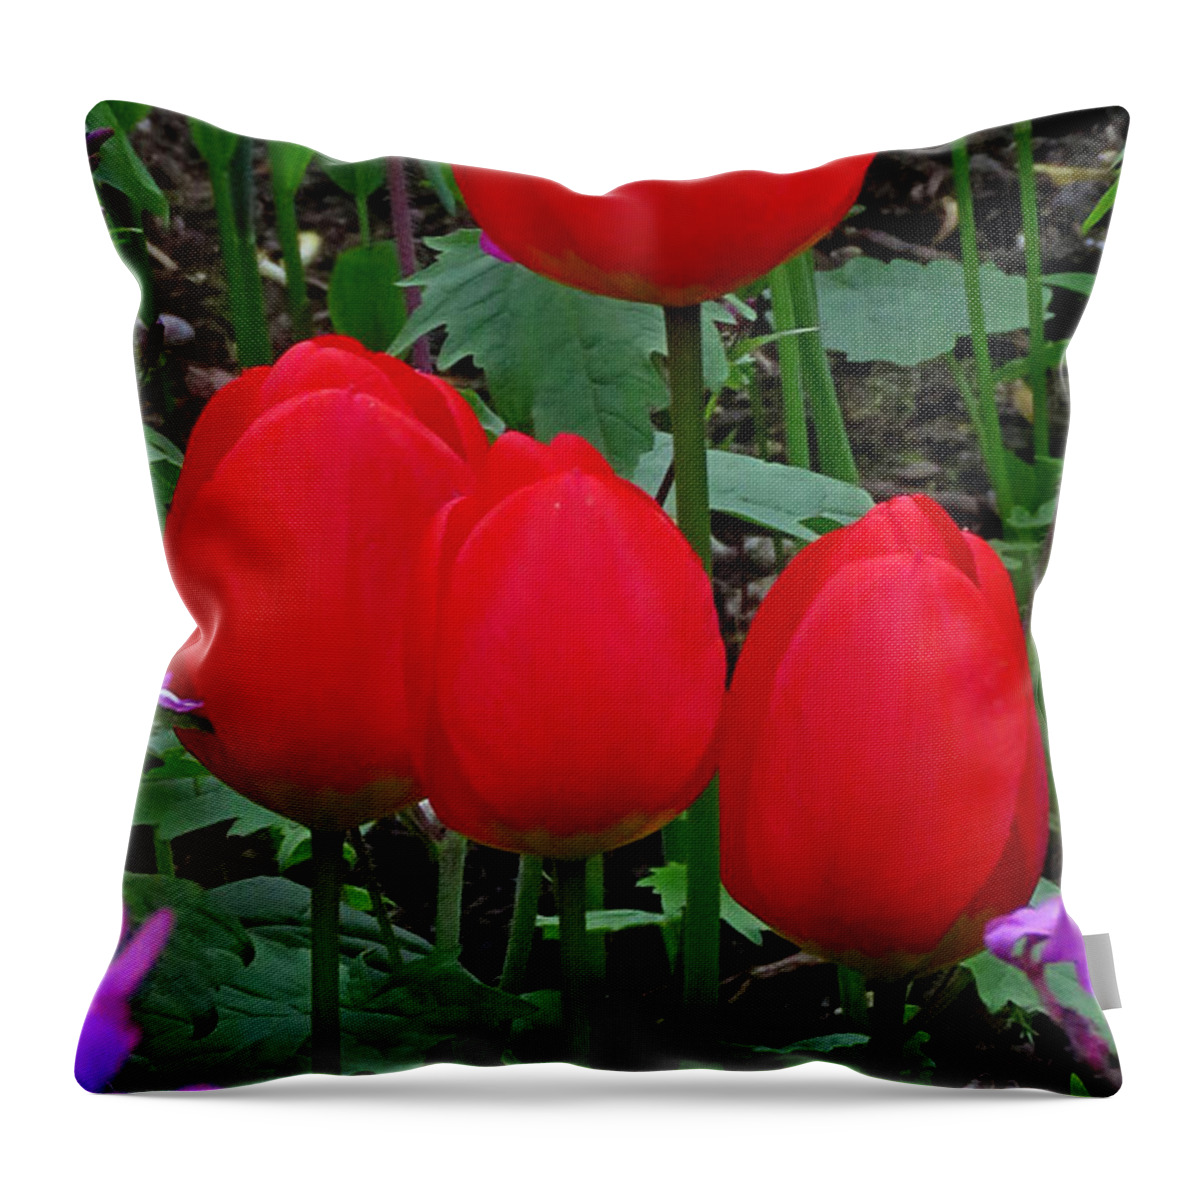 Tulips Throw Pillow featuring the photograph Red Tulips by John Topman